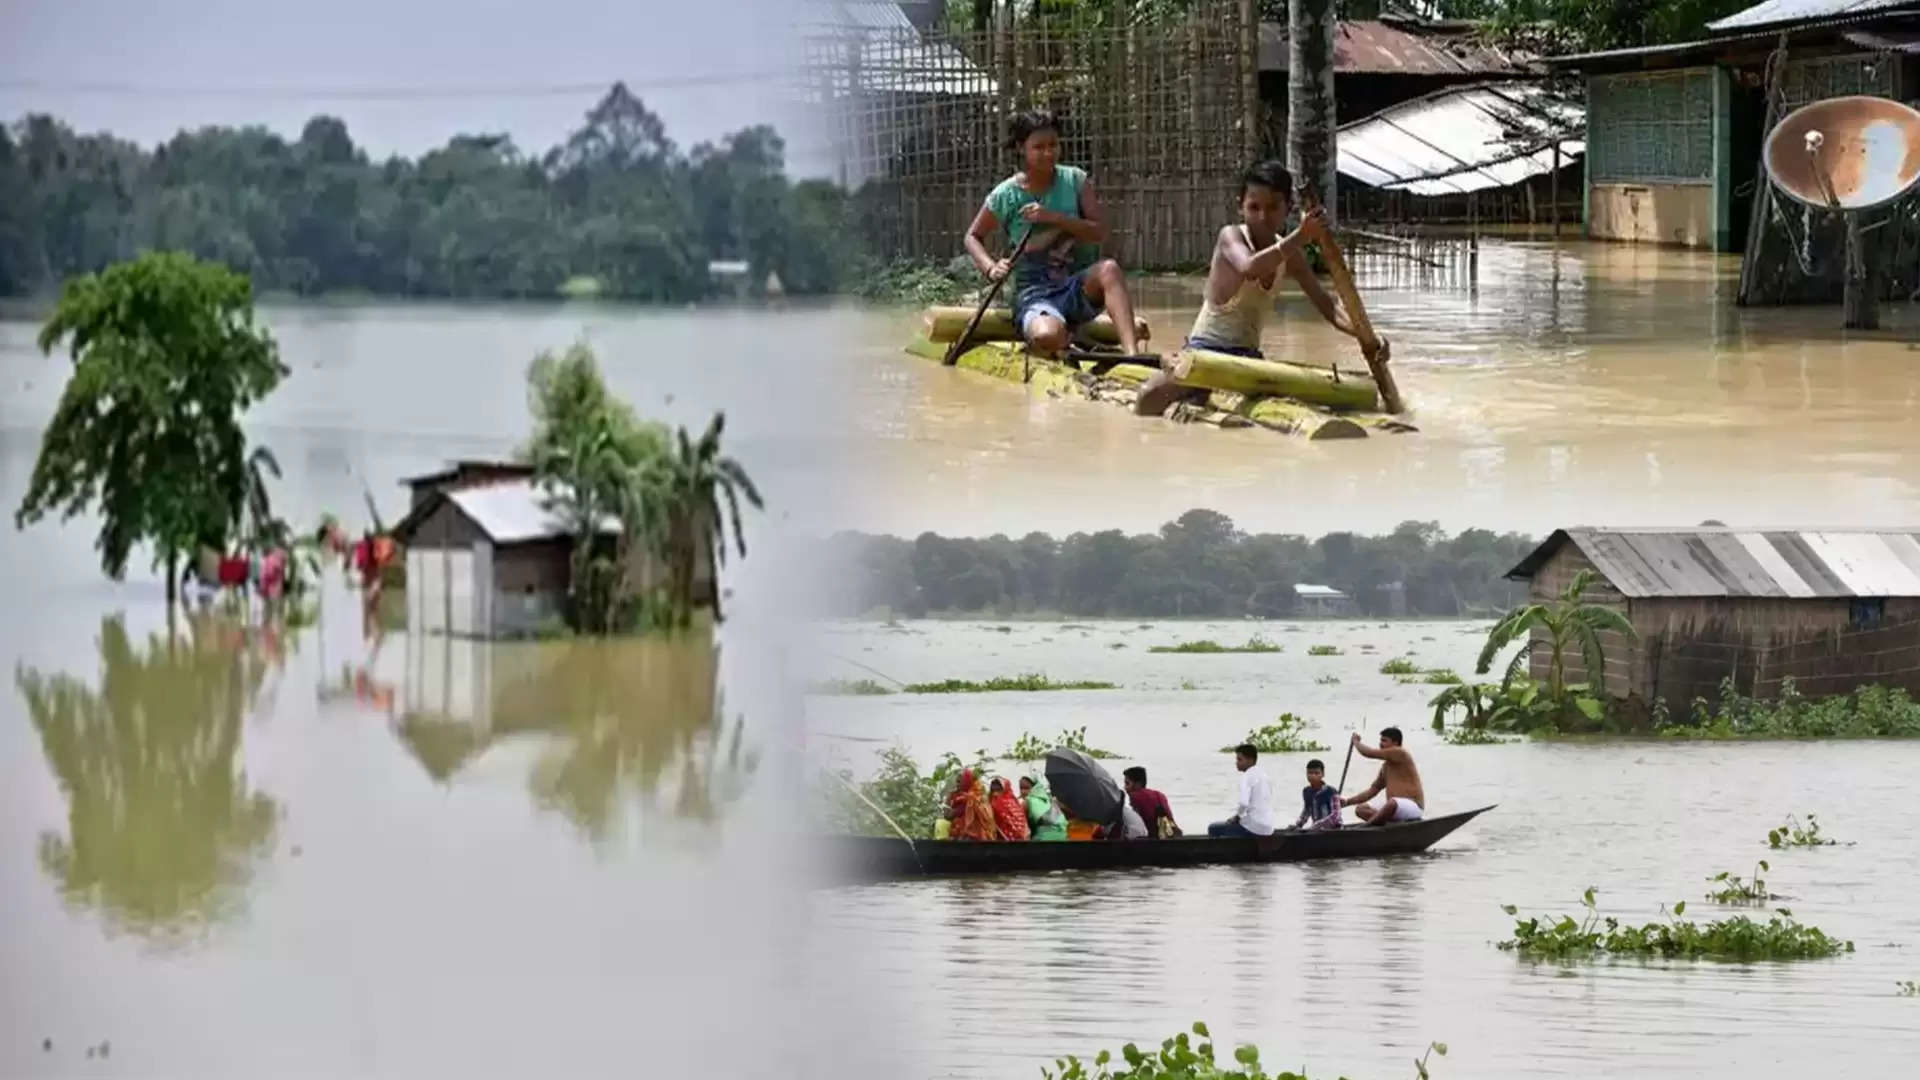 Assam Flood Situation Remains Serious With 19 Affected Districts; Bajali District Hardest Hit